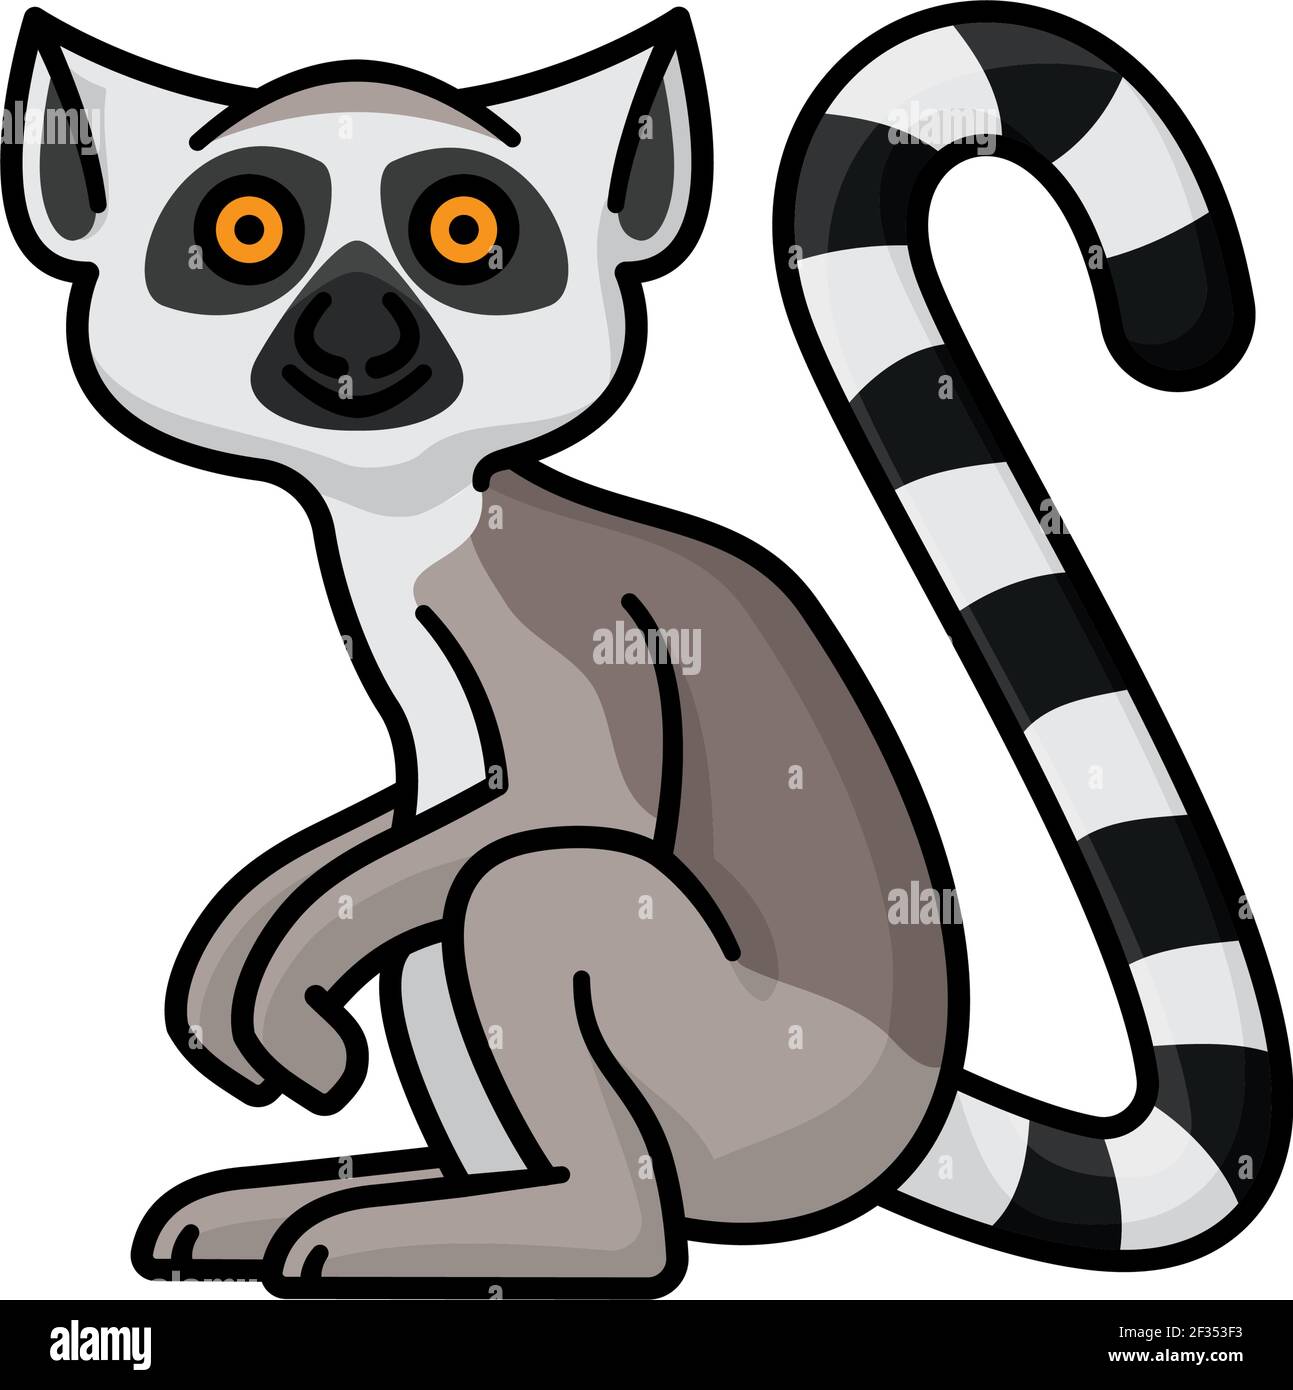 Cute ring-tailed Lemur isolated cartoon character vector illustration for Lemur Day on October 29 Stock Vector